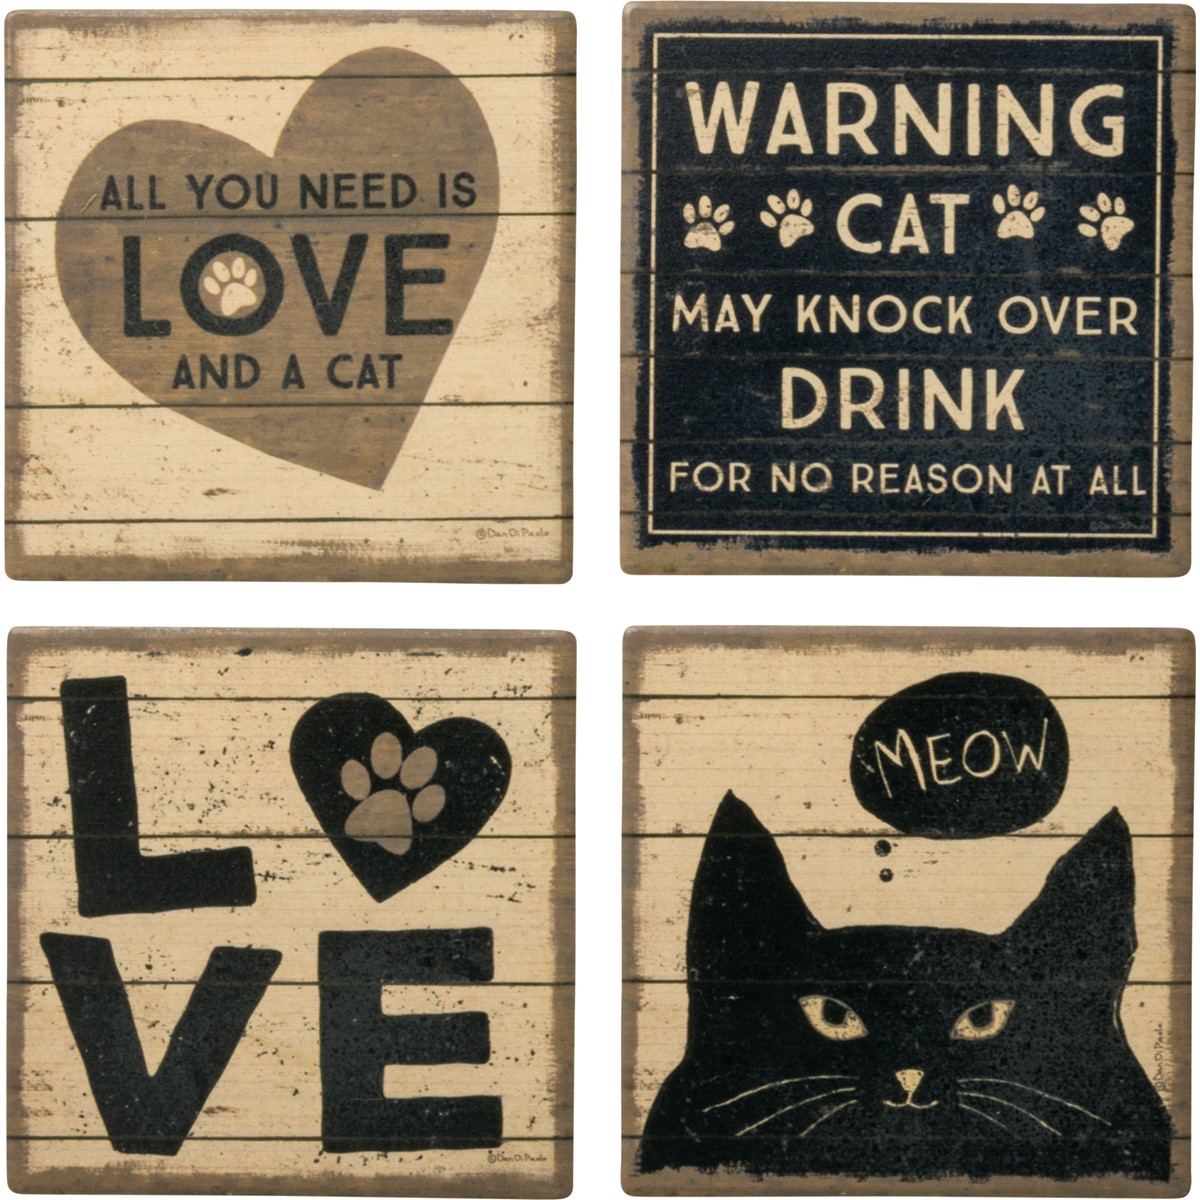 All You Need Is Love And A Cat Coaster Set - Stone, Metal, Cork